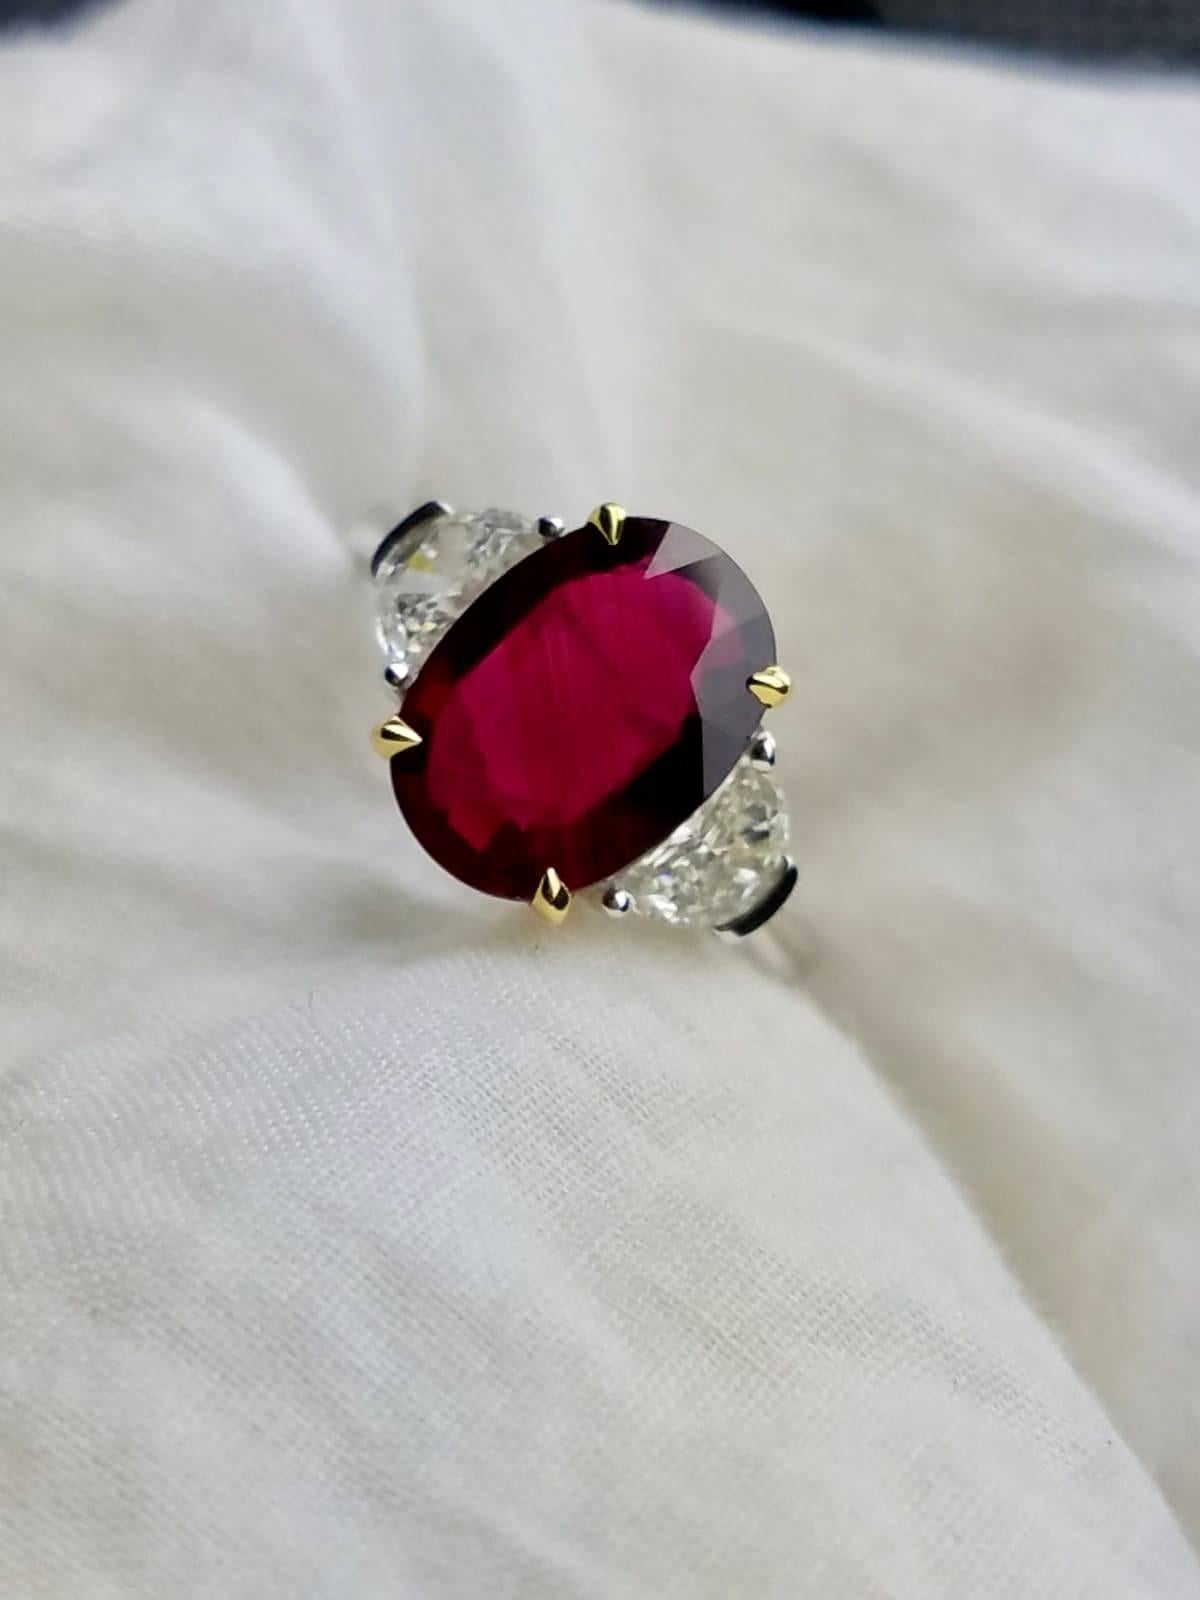 Beautiful, certified, no heat Mozambique Ruby (eye-clean) ring with 2 half moon Diamond side stone, set in 18K Gold.

Stone Details: 
Stone: Mozambique Ruby
Cut: Oval
Carat Weight: 4.02

Diamond Details:
Cut: Half Moon
Total Carat Weight: